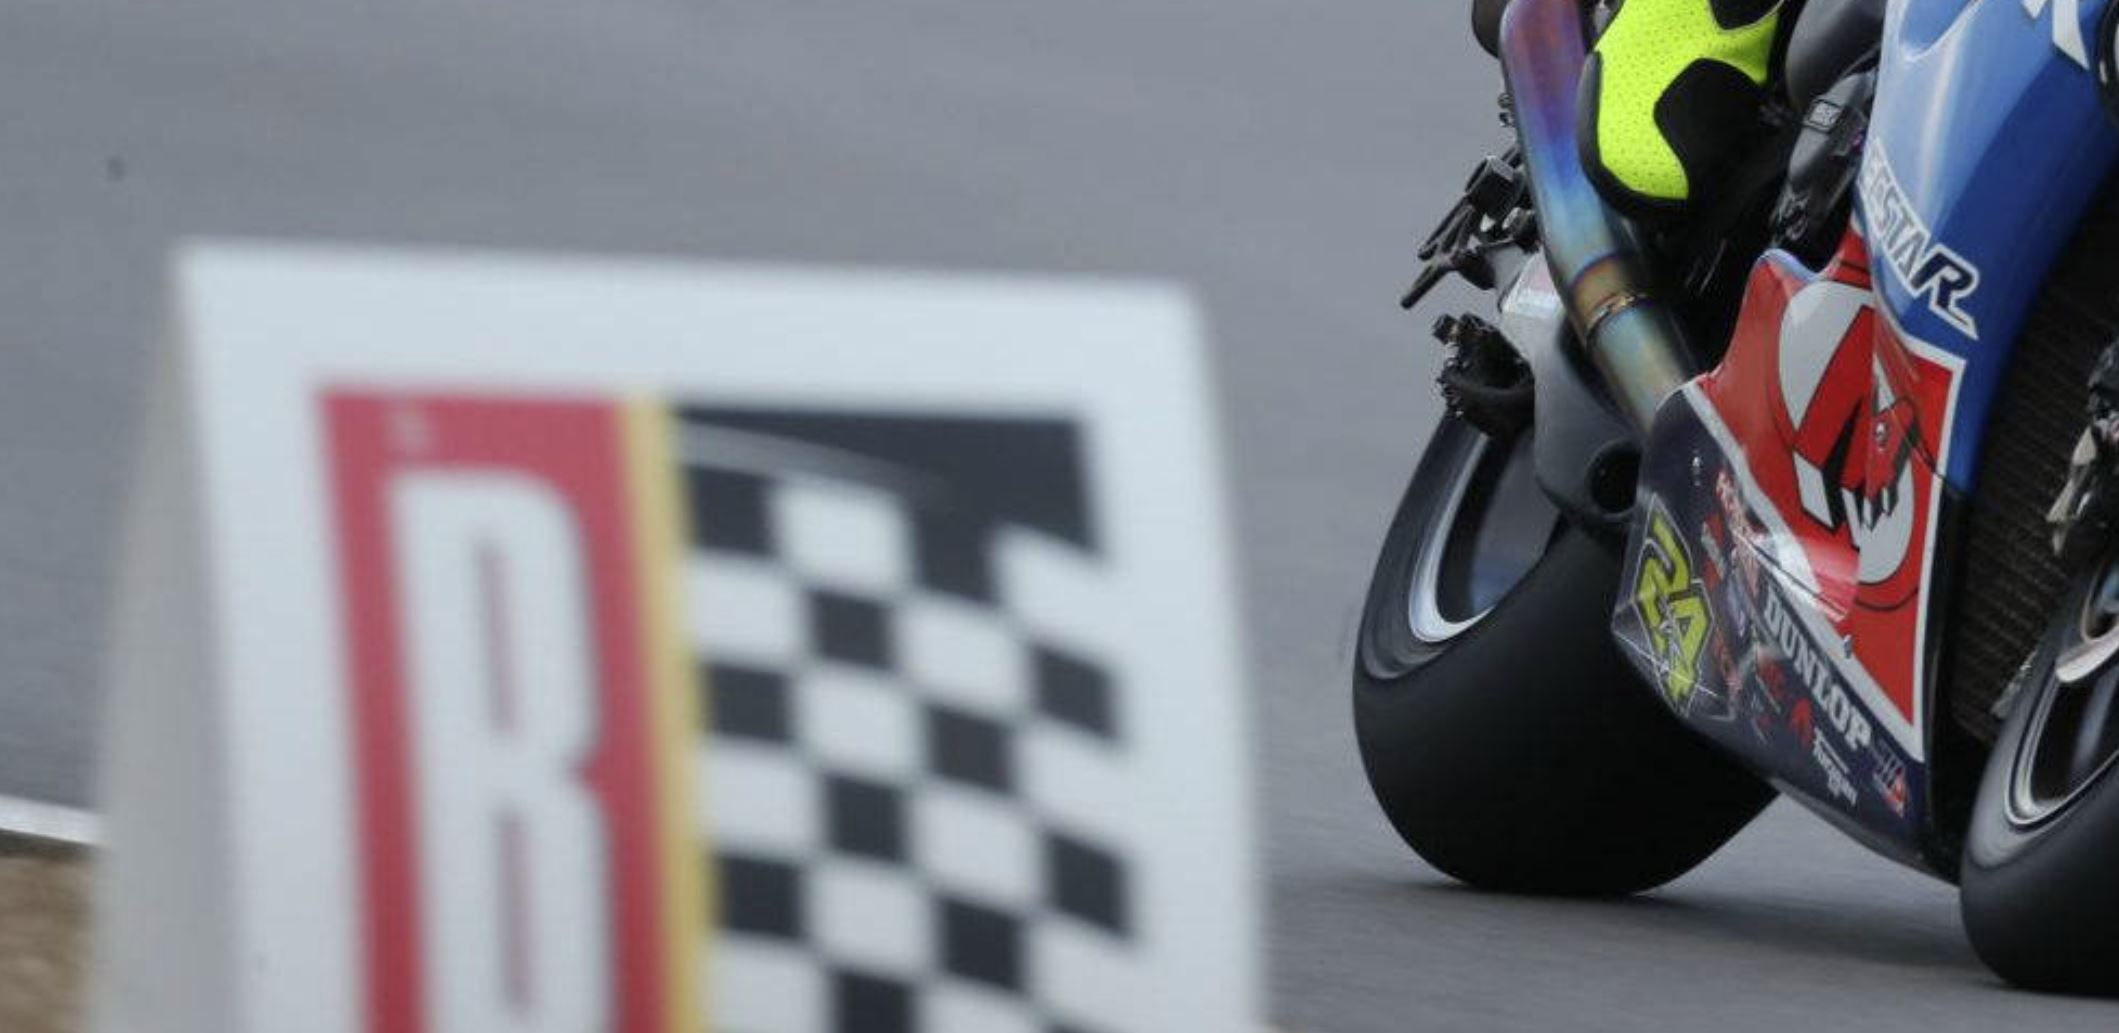 Man killed in motorcycle accident at Barber Motorsports Park